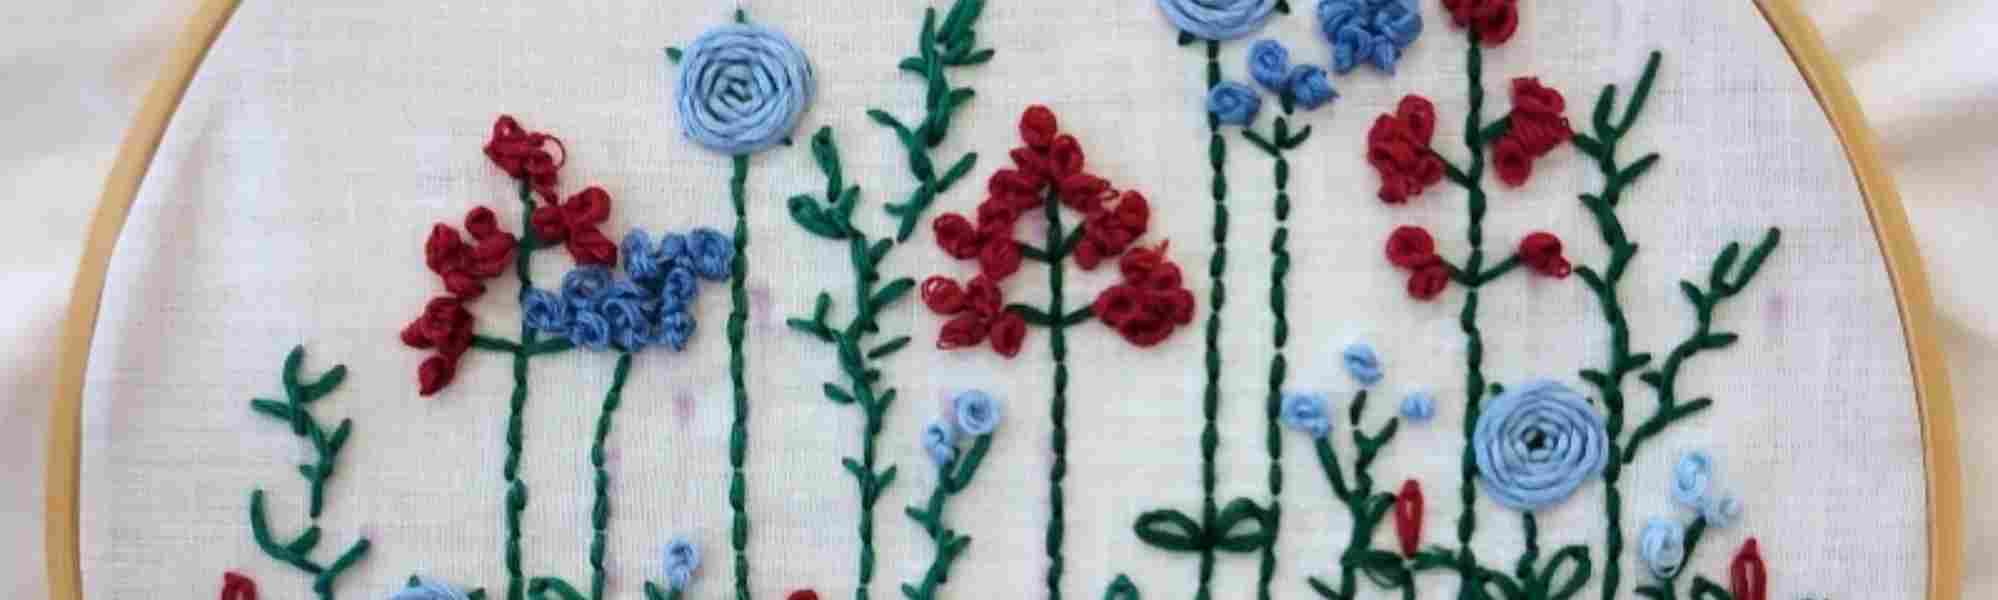 Embroidery Header